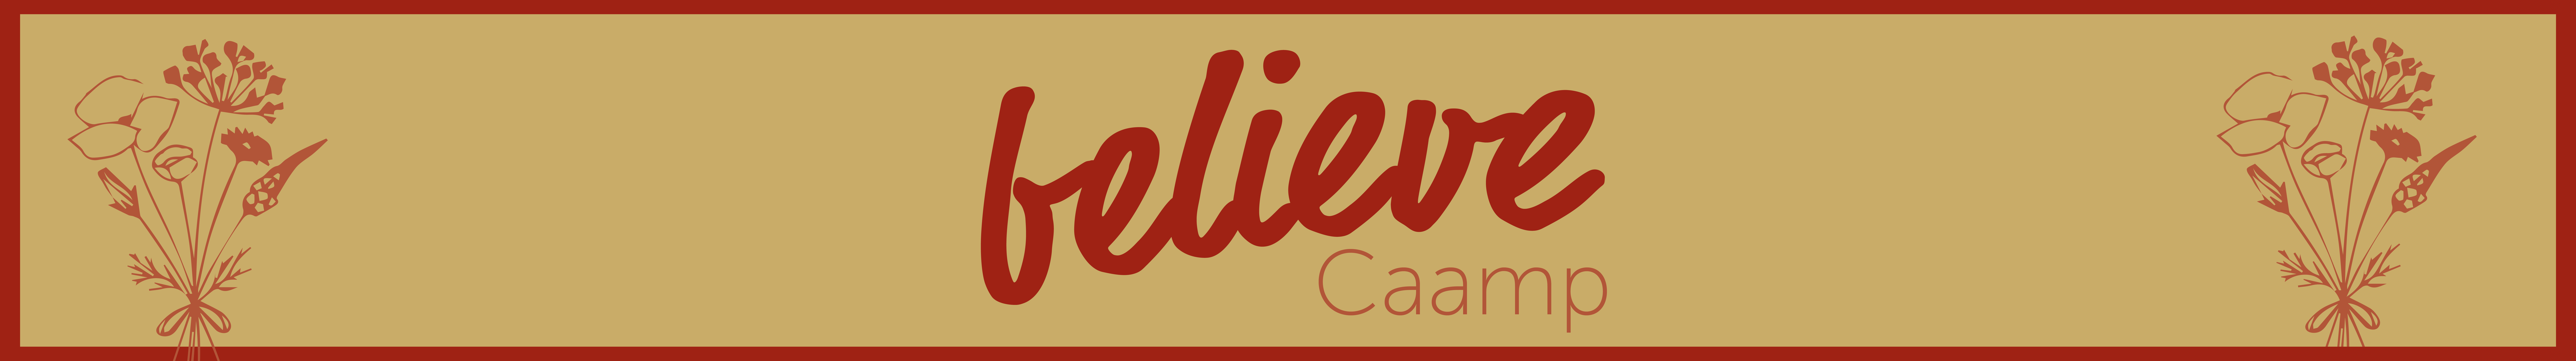 Caamp, "Believe," Pick of the Week